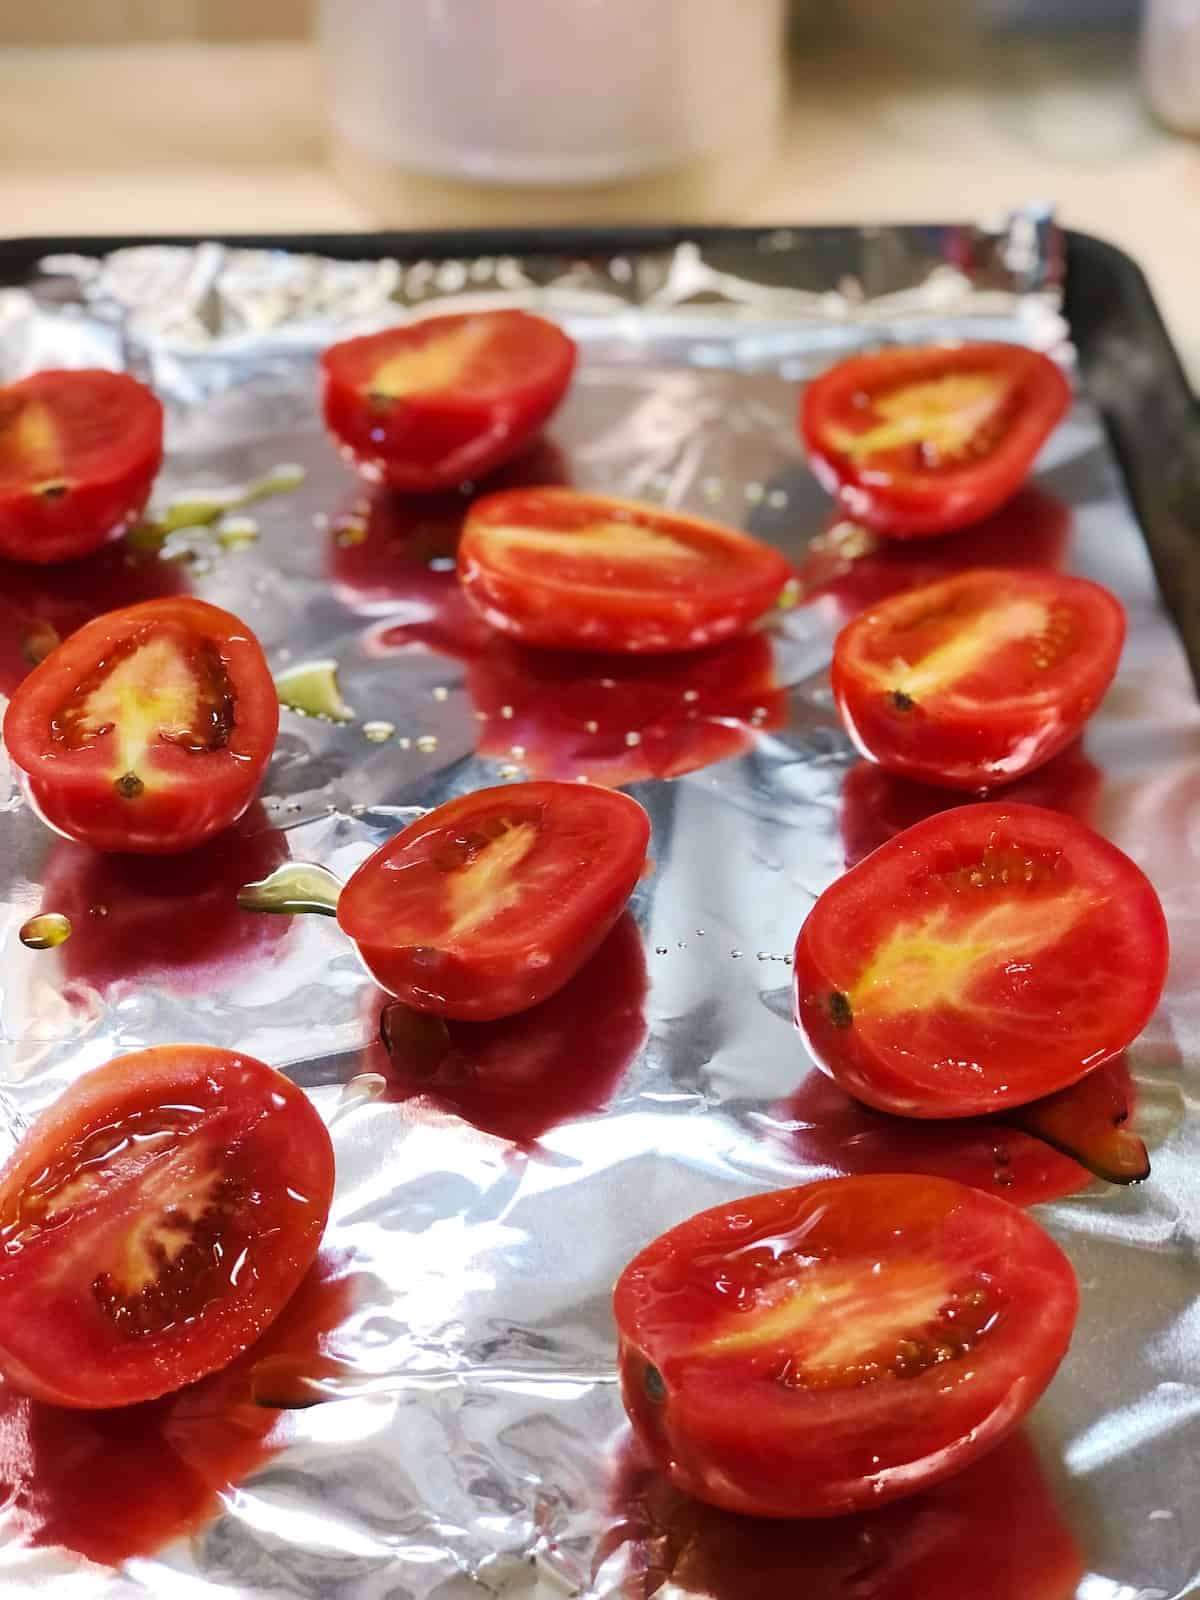 olive oil added to tomatoes